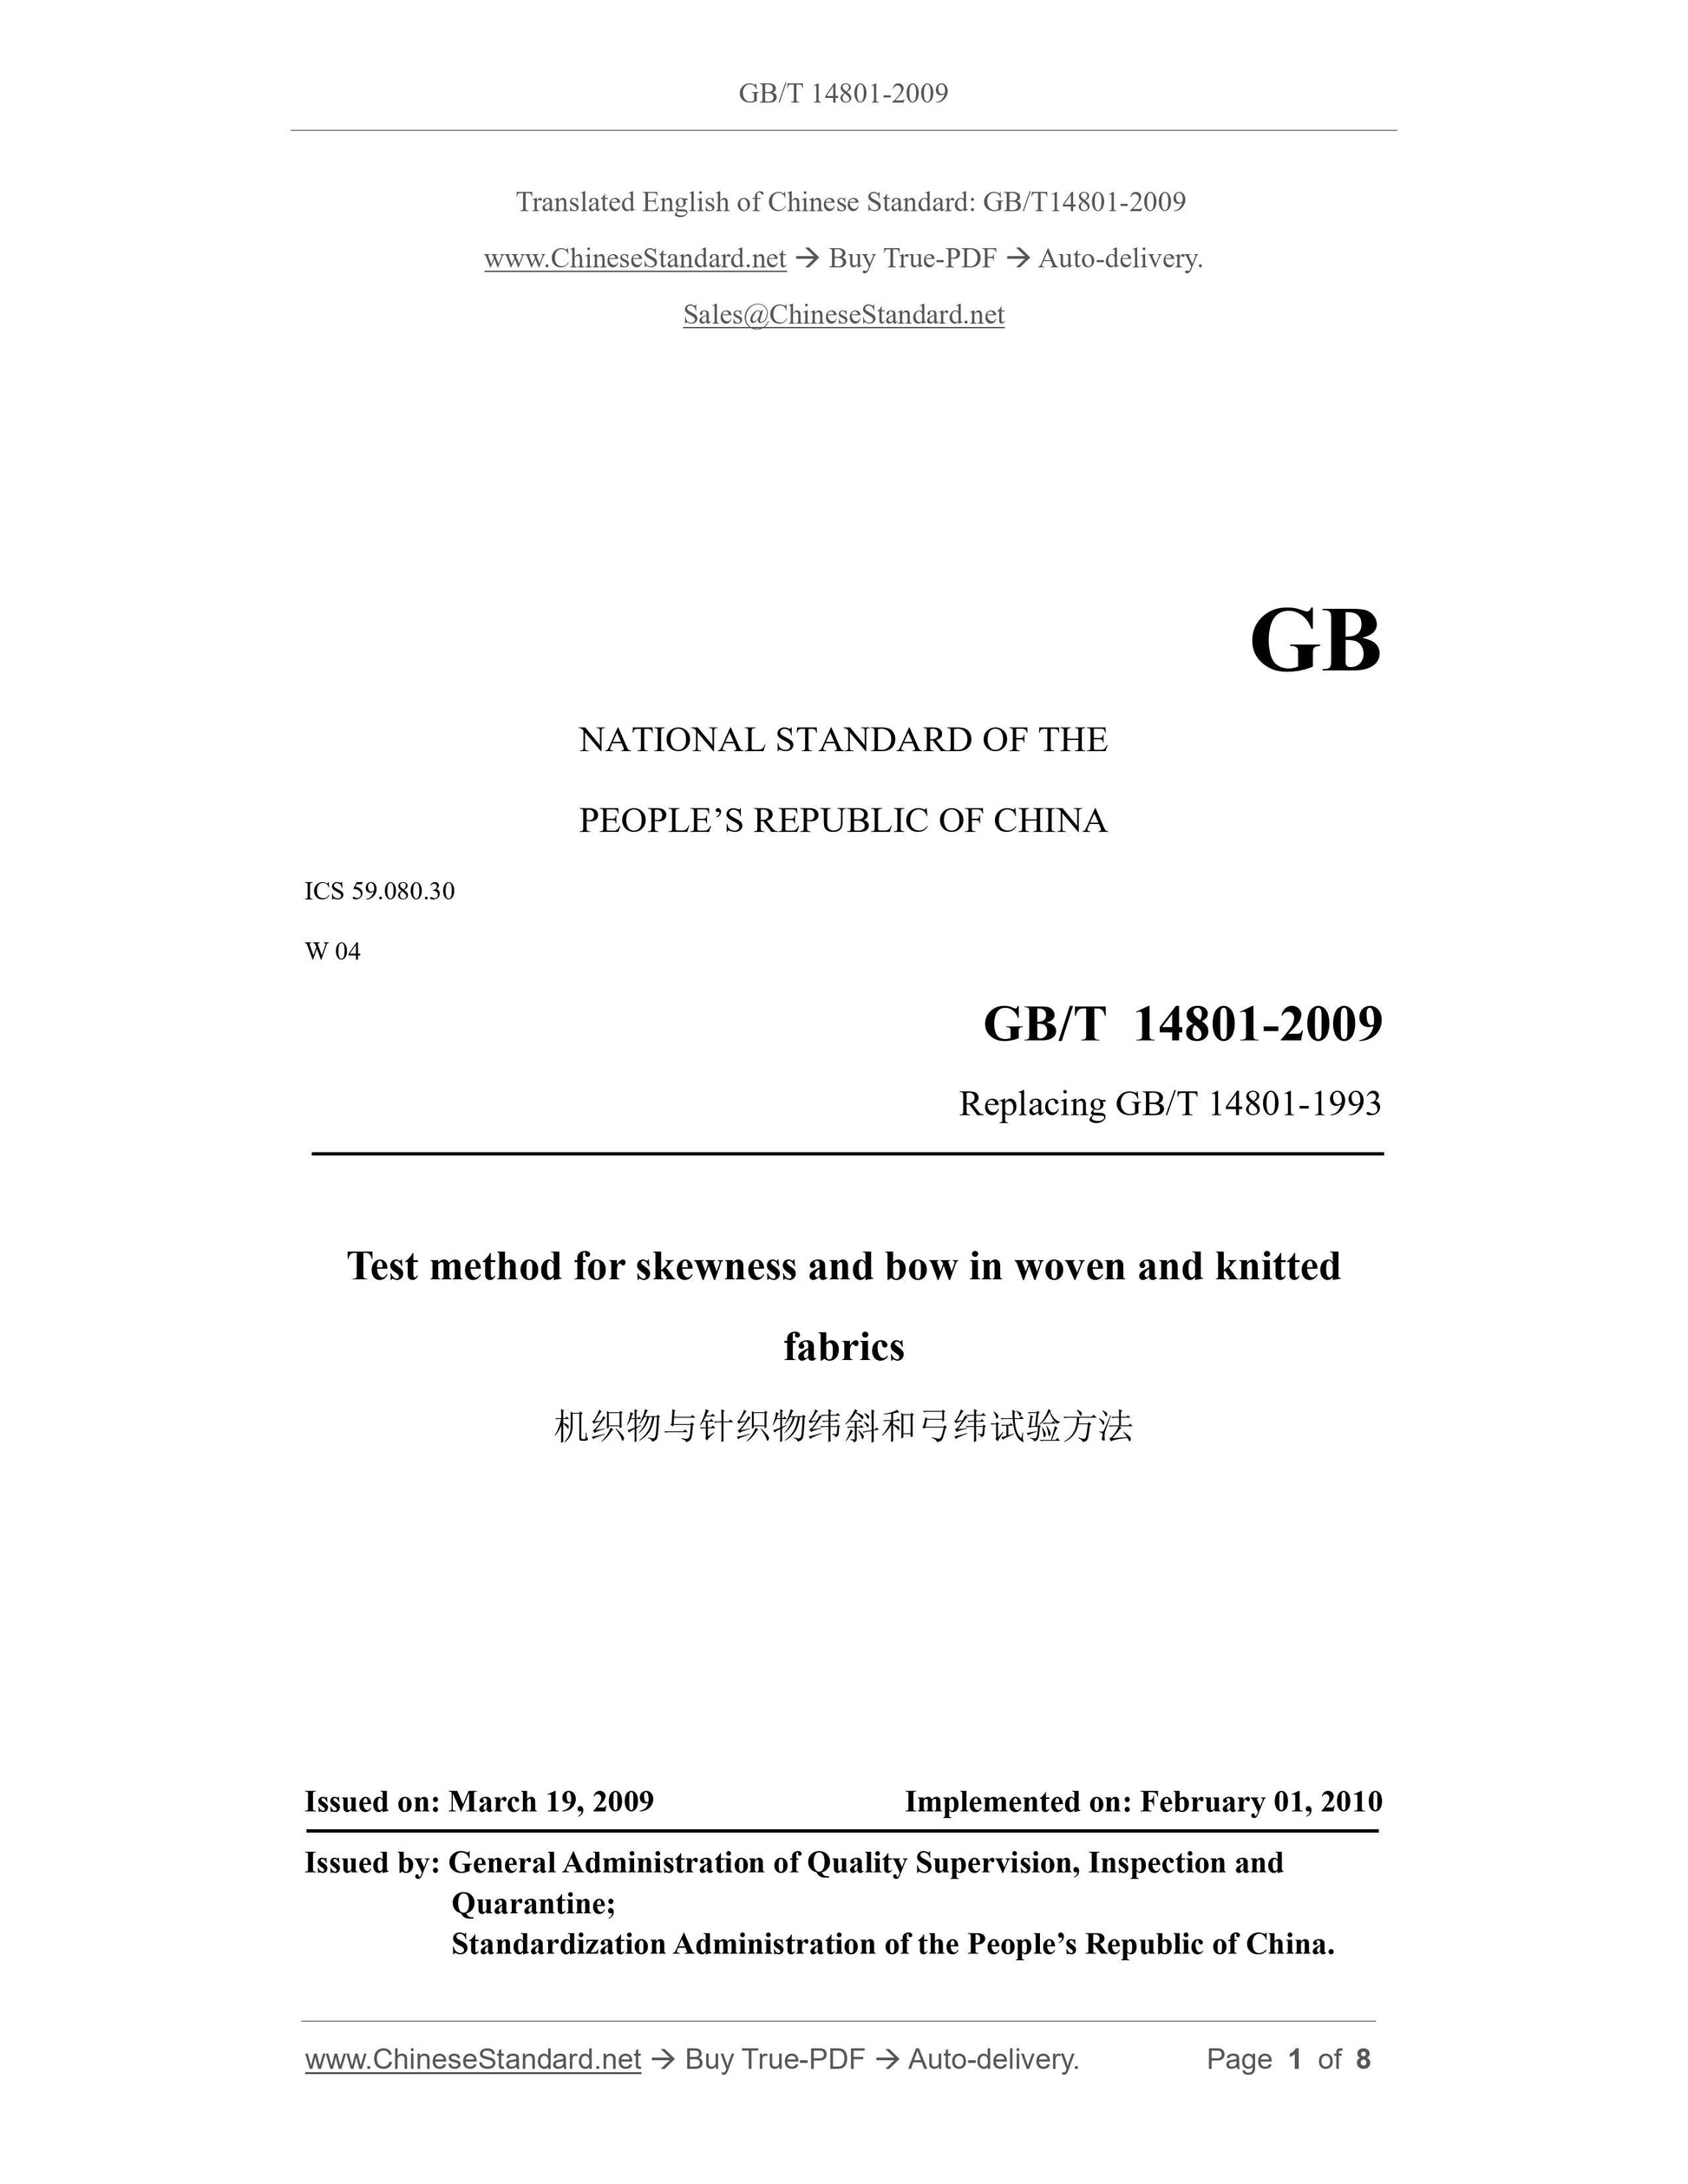 GB/T 14801-2009 Page 1